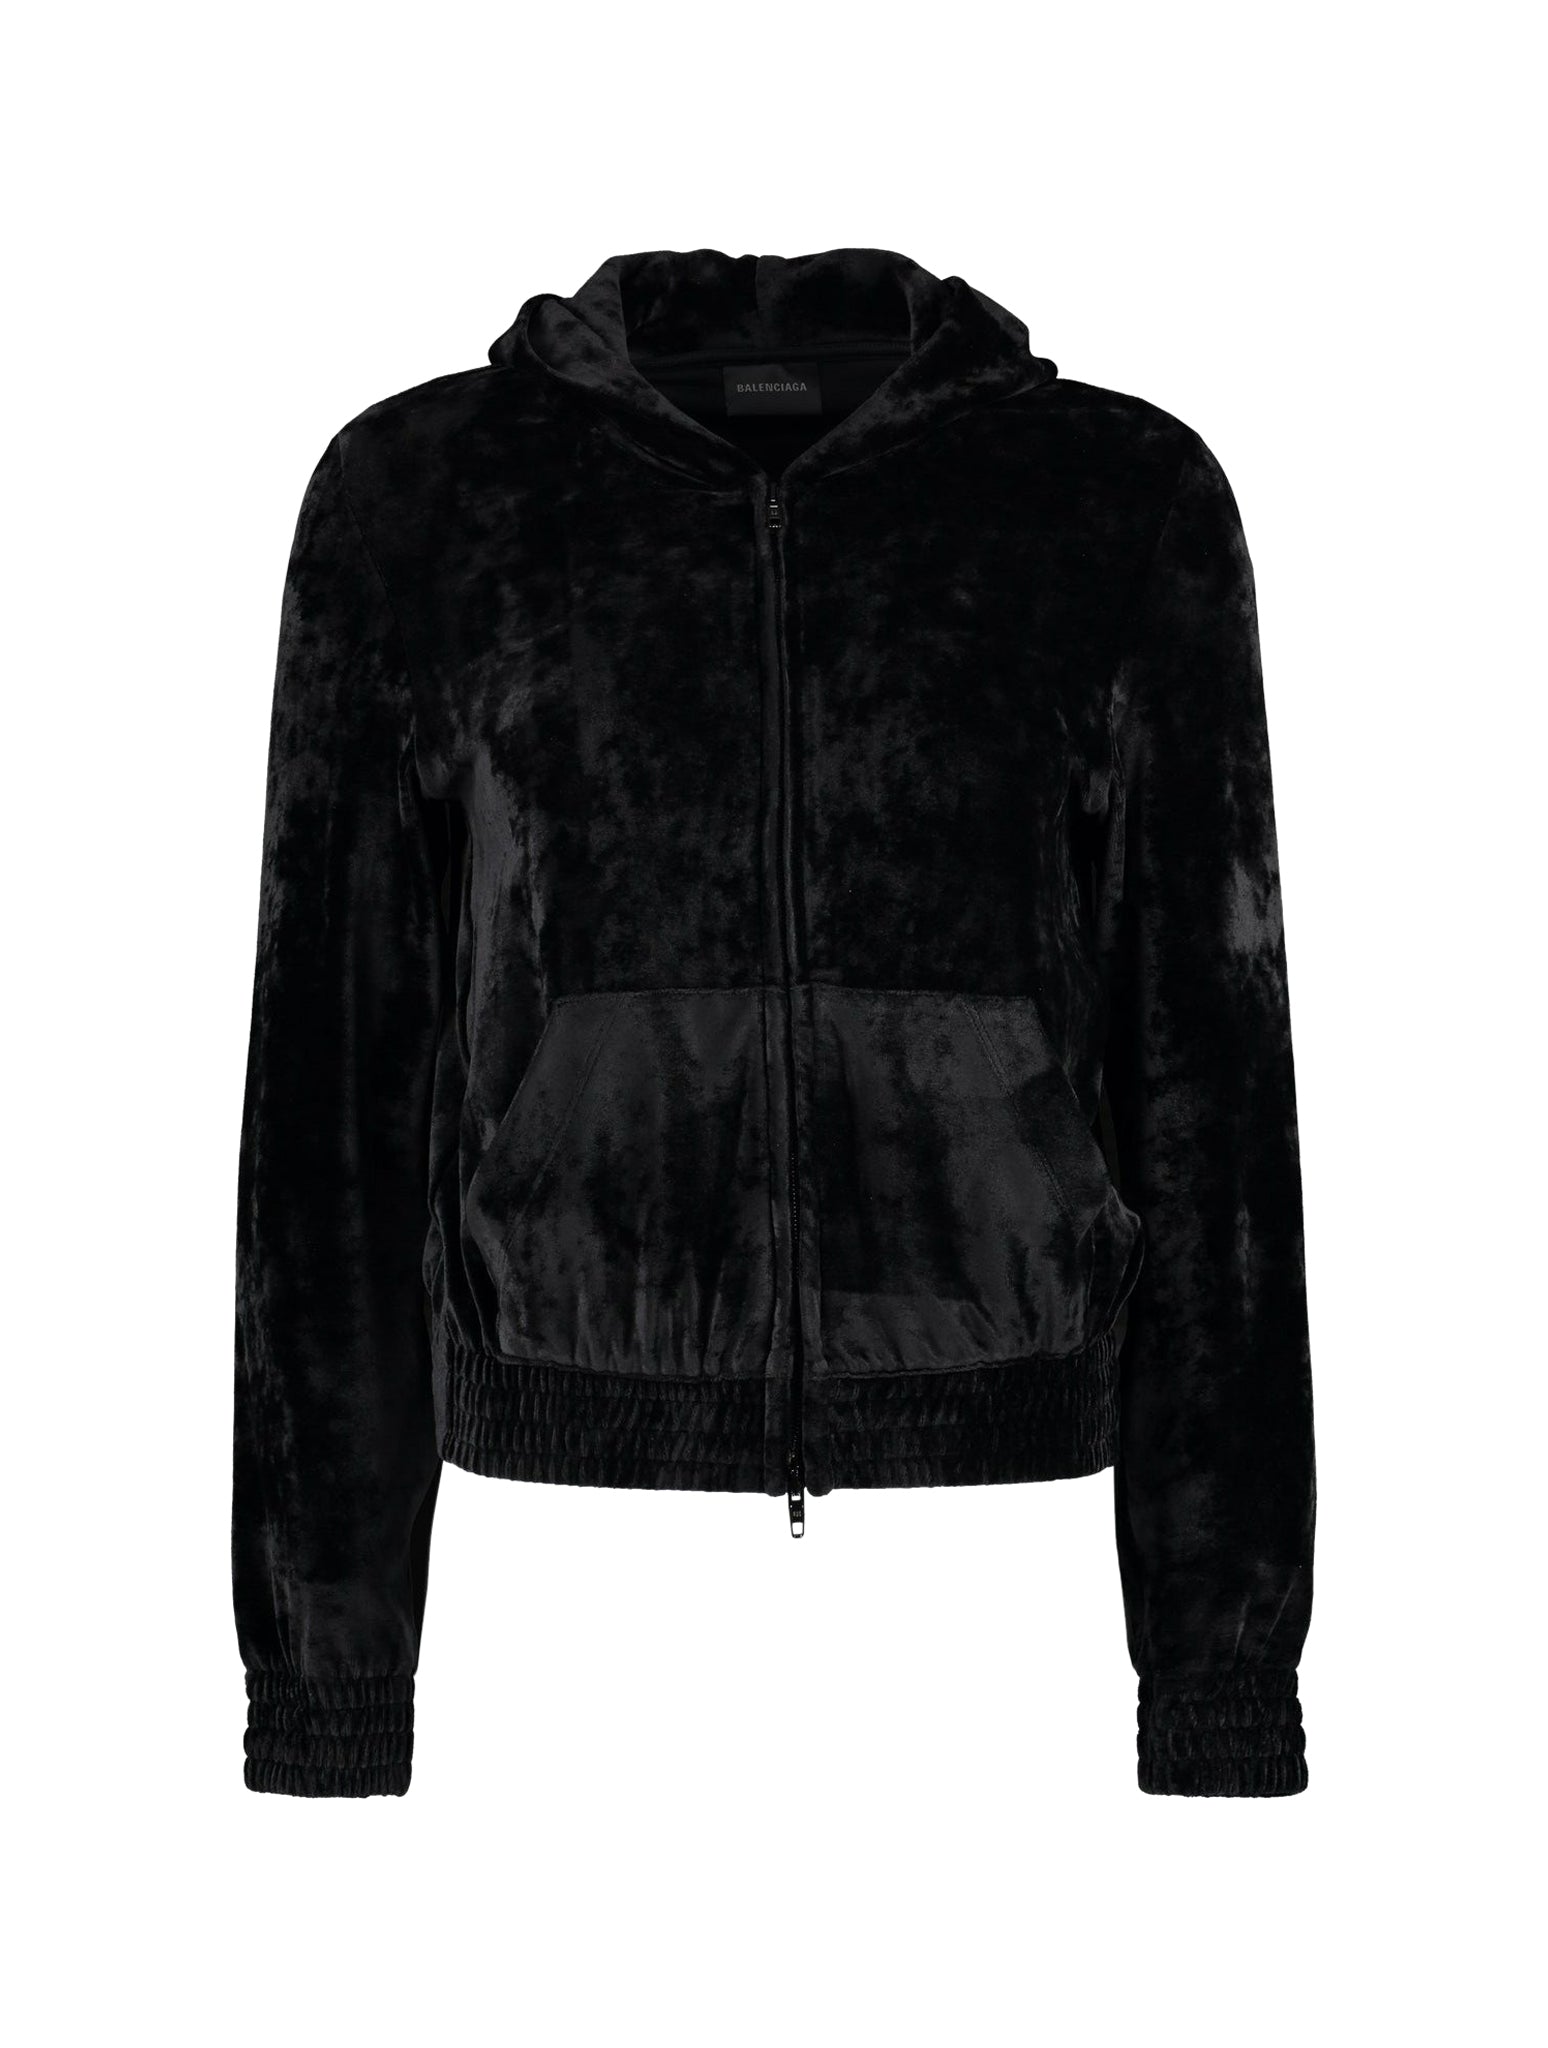 ZIP-UP HOODIE BB PARIS STRASS FITTED FOR WOMEN IN BLACK